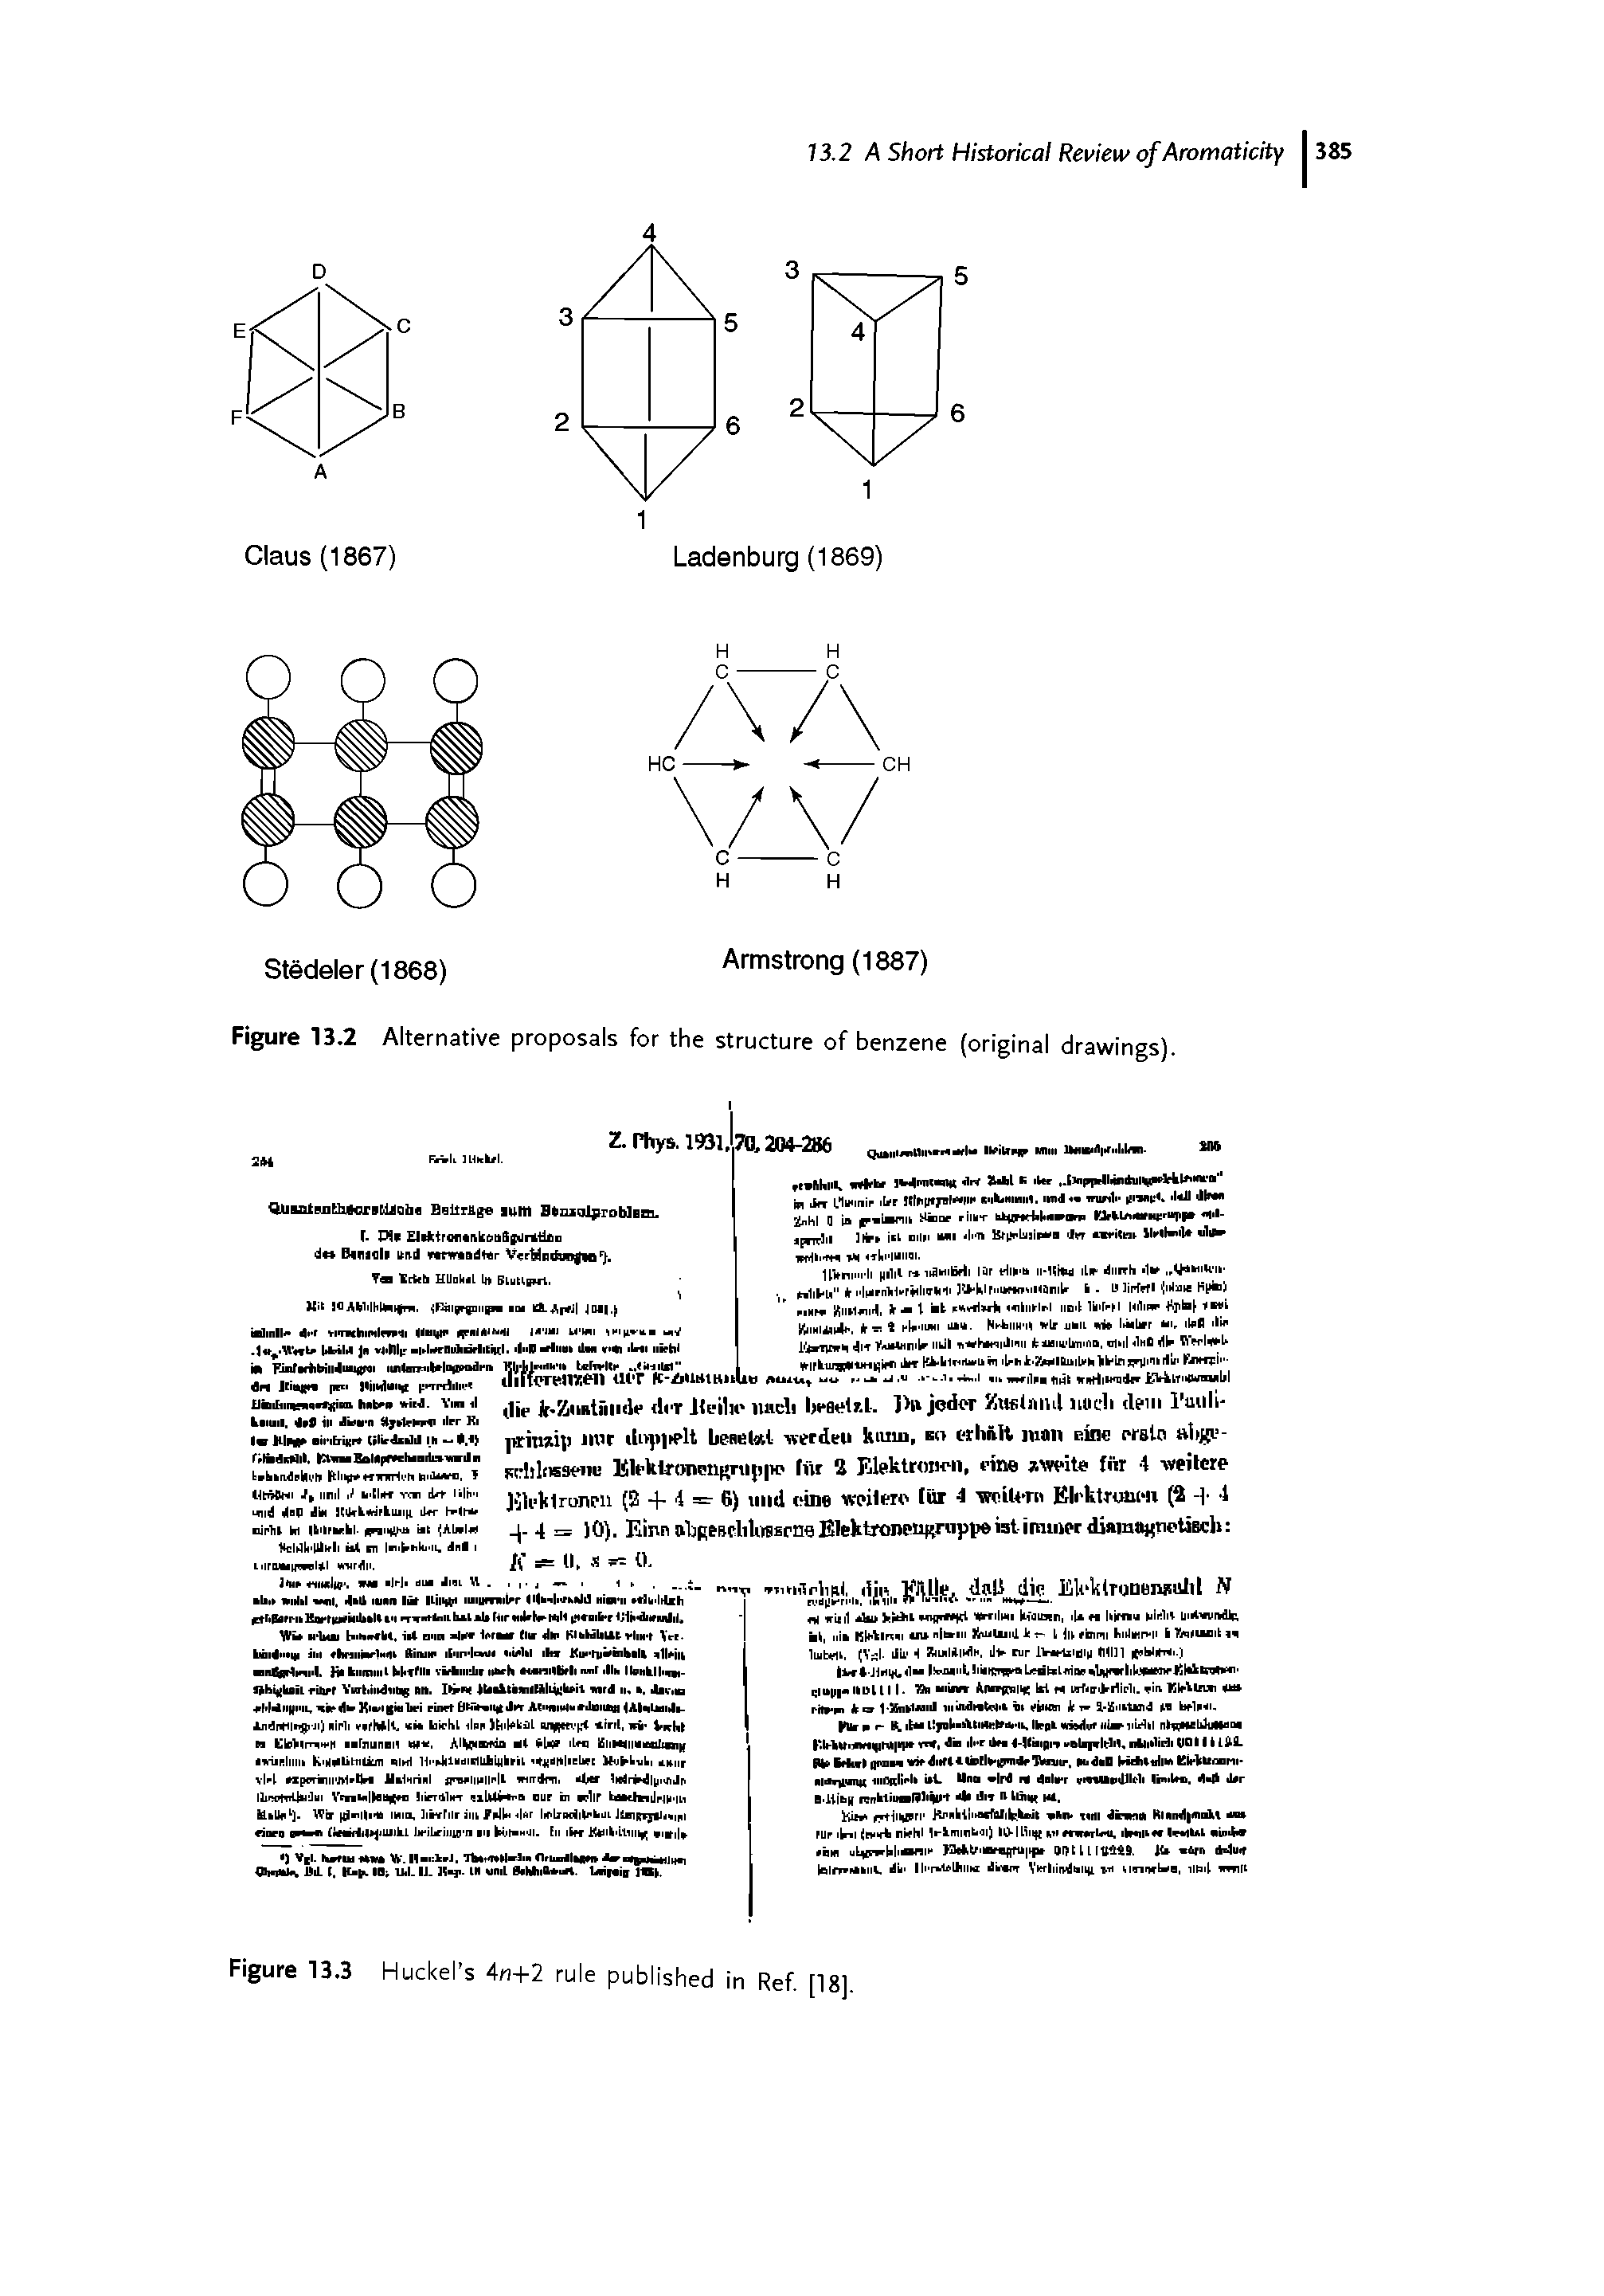 Figure 13.2 Alternative proposals for the structure of benzene (original drawings).